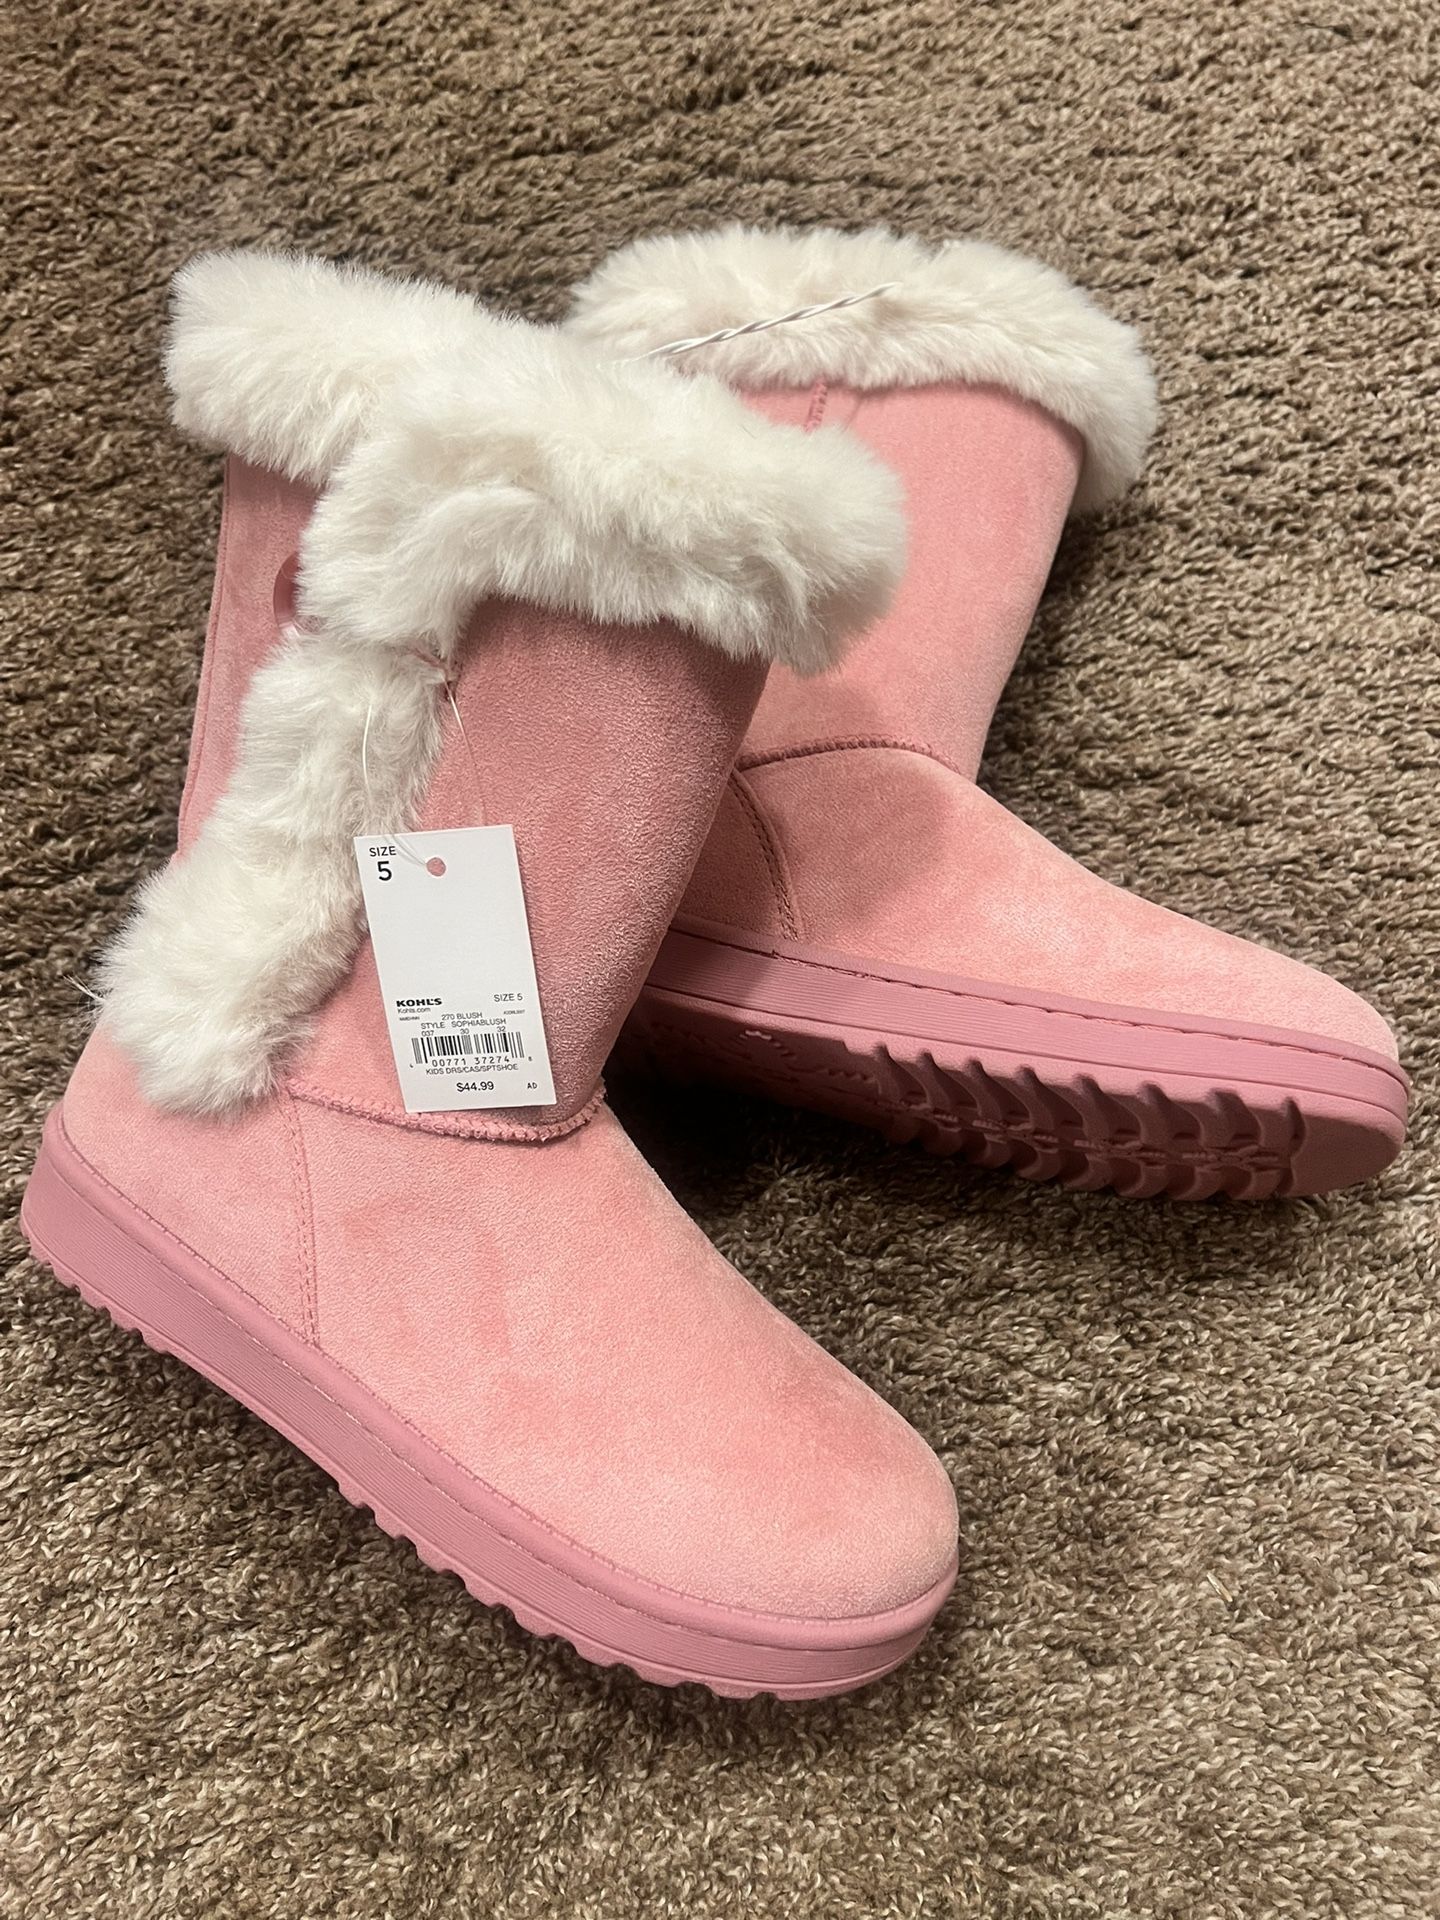 New Pink Boots Size 6-7